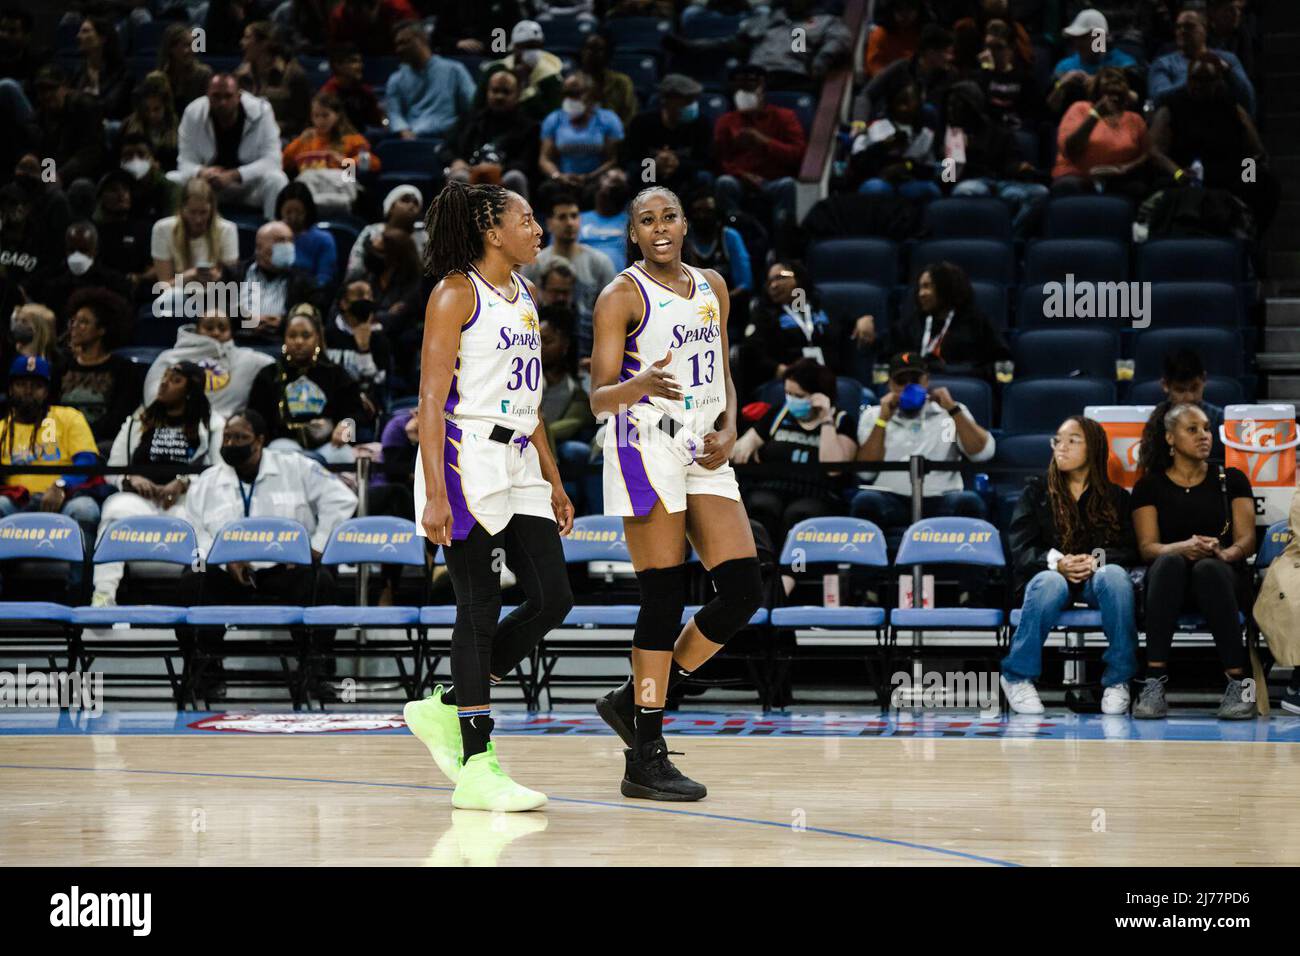 Nneka Ogwumike (30 Los Angeles Sparks) and sister Chiney Ogwumike (13 Los Angeles Sparks) speak to eachother during the WNBA basketball game between the Chicago Sky and Los Angeles Sparks on Friday May 6th, 2022 at Wintrust Arena, Chicago, USA. (NO COMMERCIAL USAGE)  Shaina Benhiyoun/SPP Stock Photo